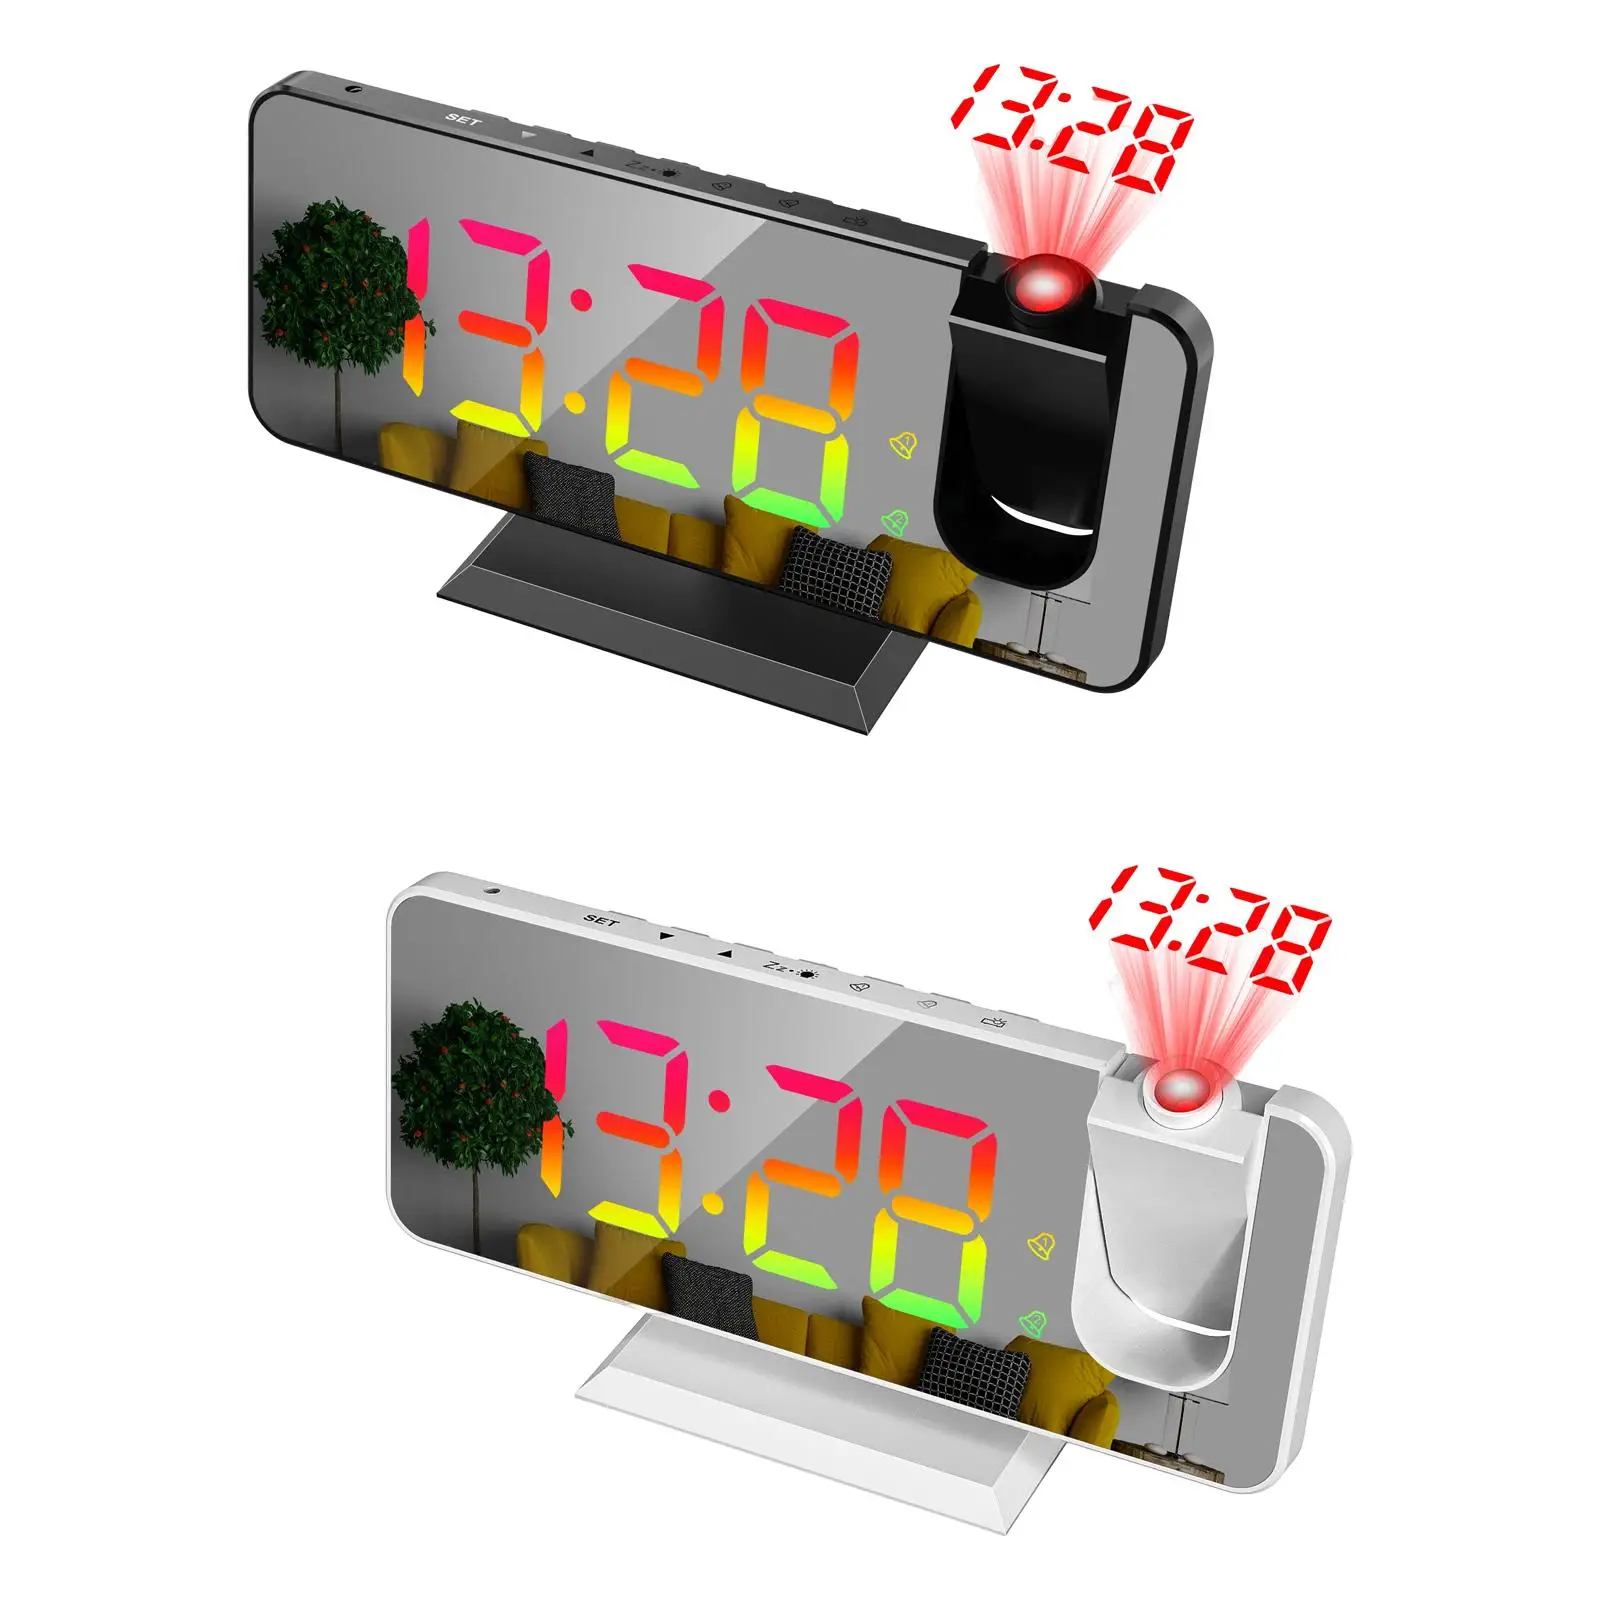 180 Rotation Projection Alarm Clock Colorful LED Digital Bedside Desktop Clock USB Powered Snooze 12/24H Large Screen Mirrored